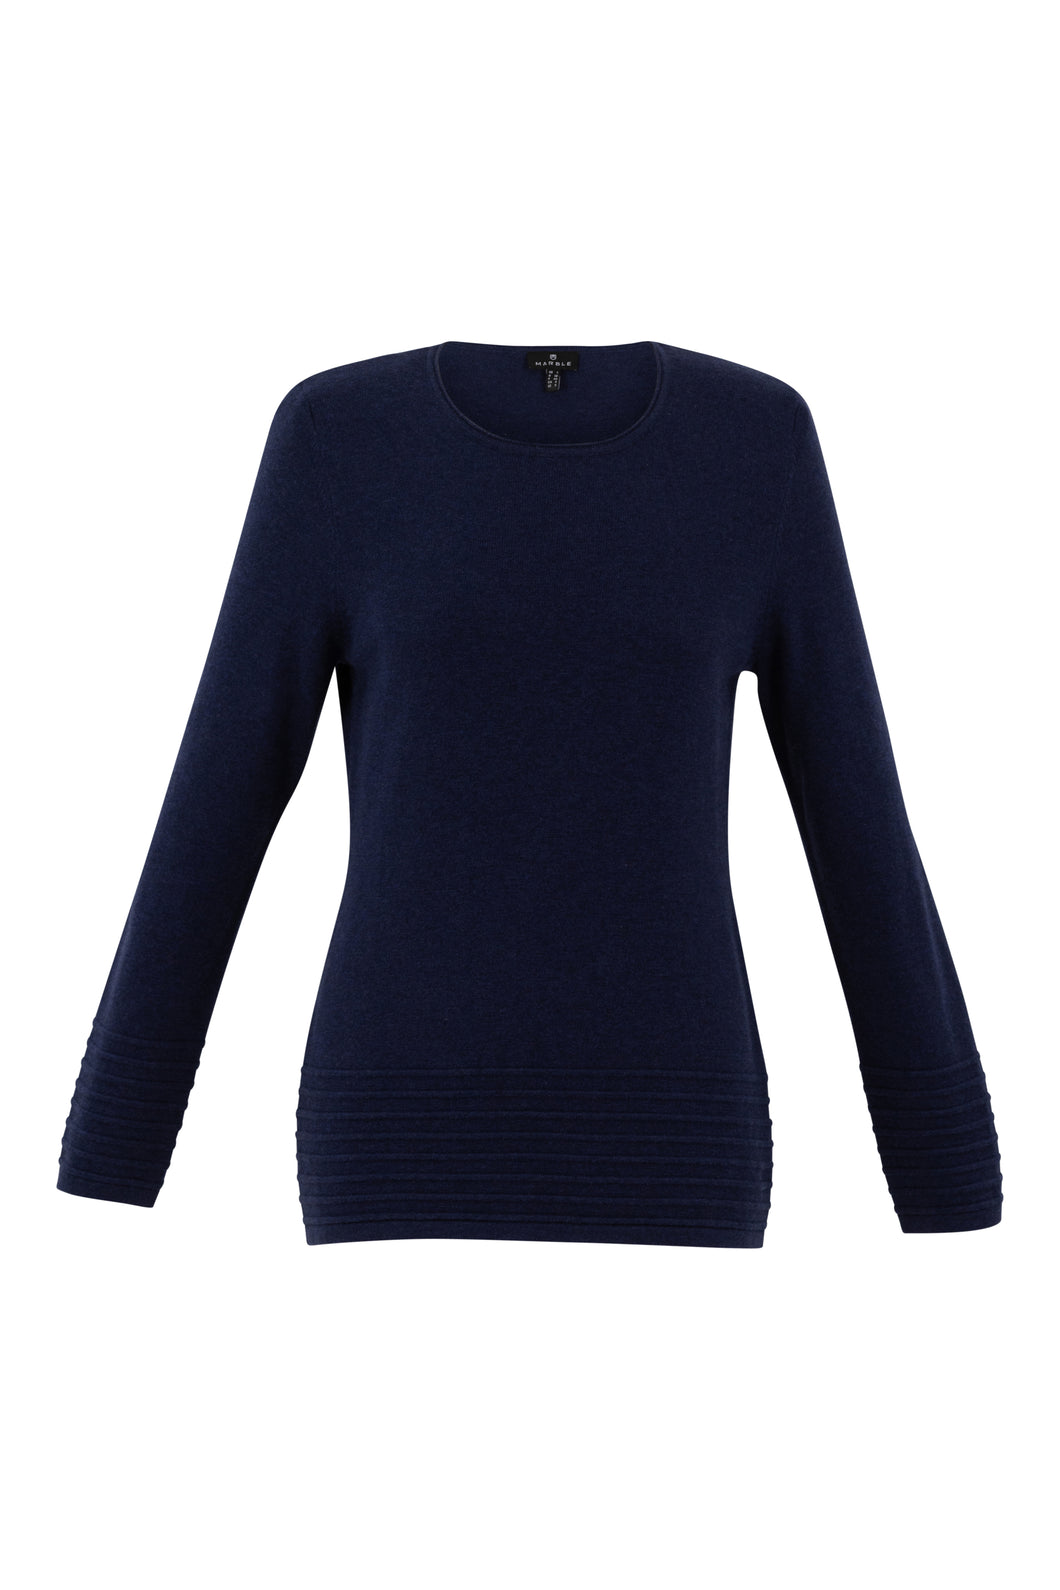 MARBLE FASHIONS 6377 SWEATER COLOUR 103 - NAVY